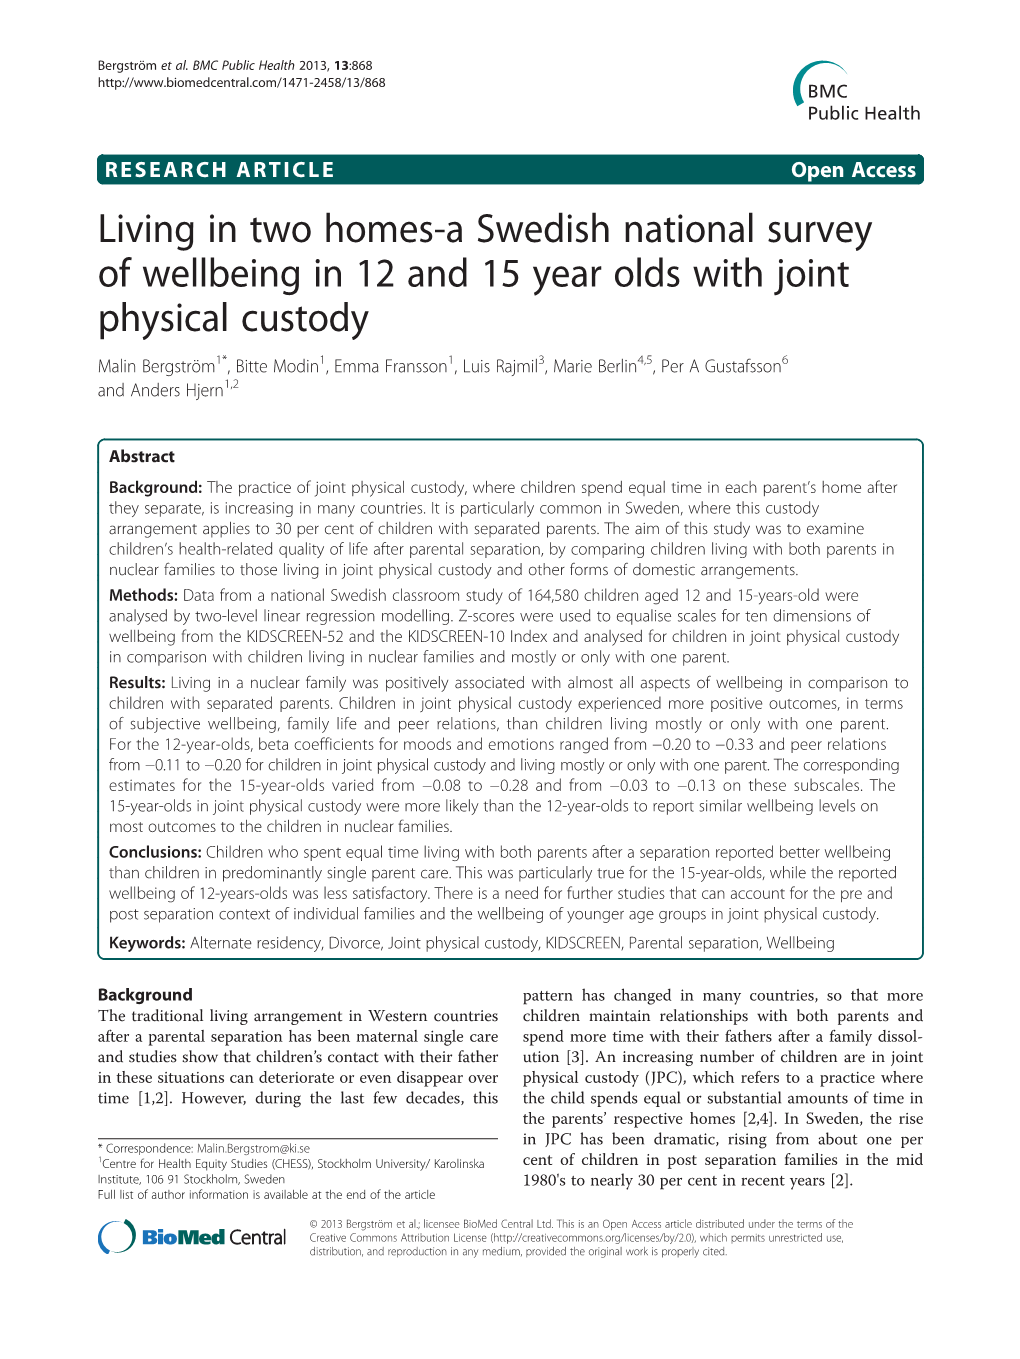 Living in Two Homes-A Swedish National Survey Of